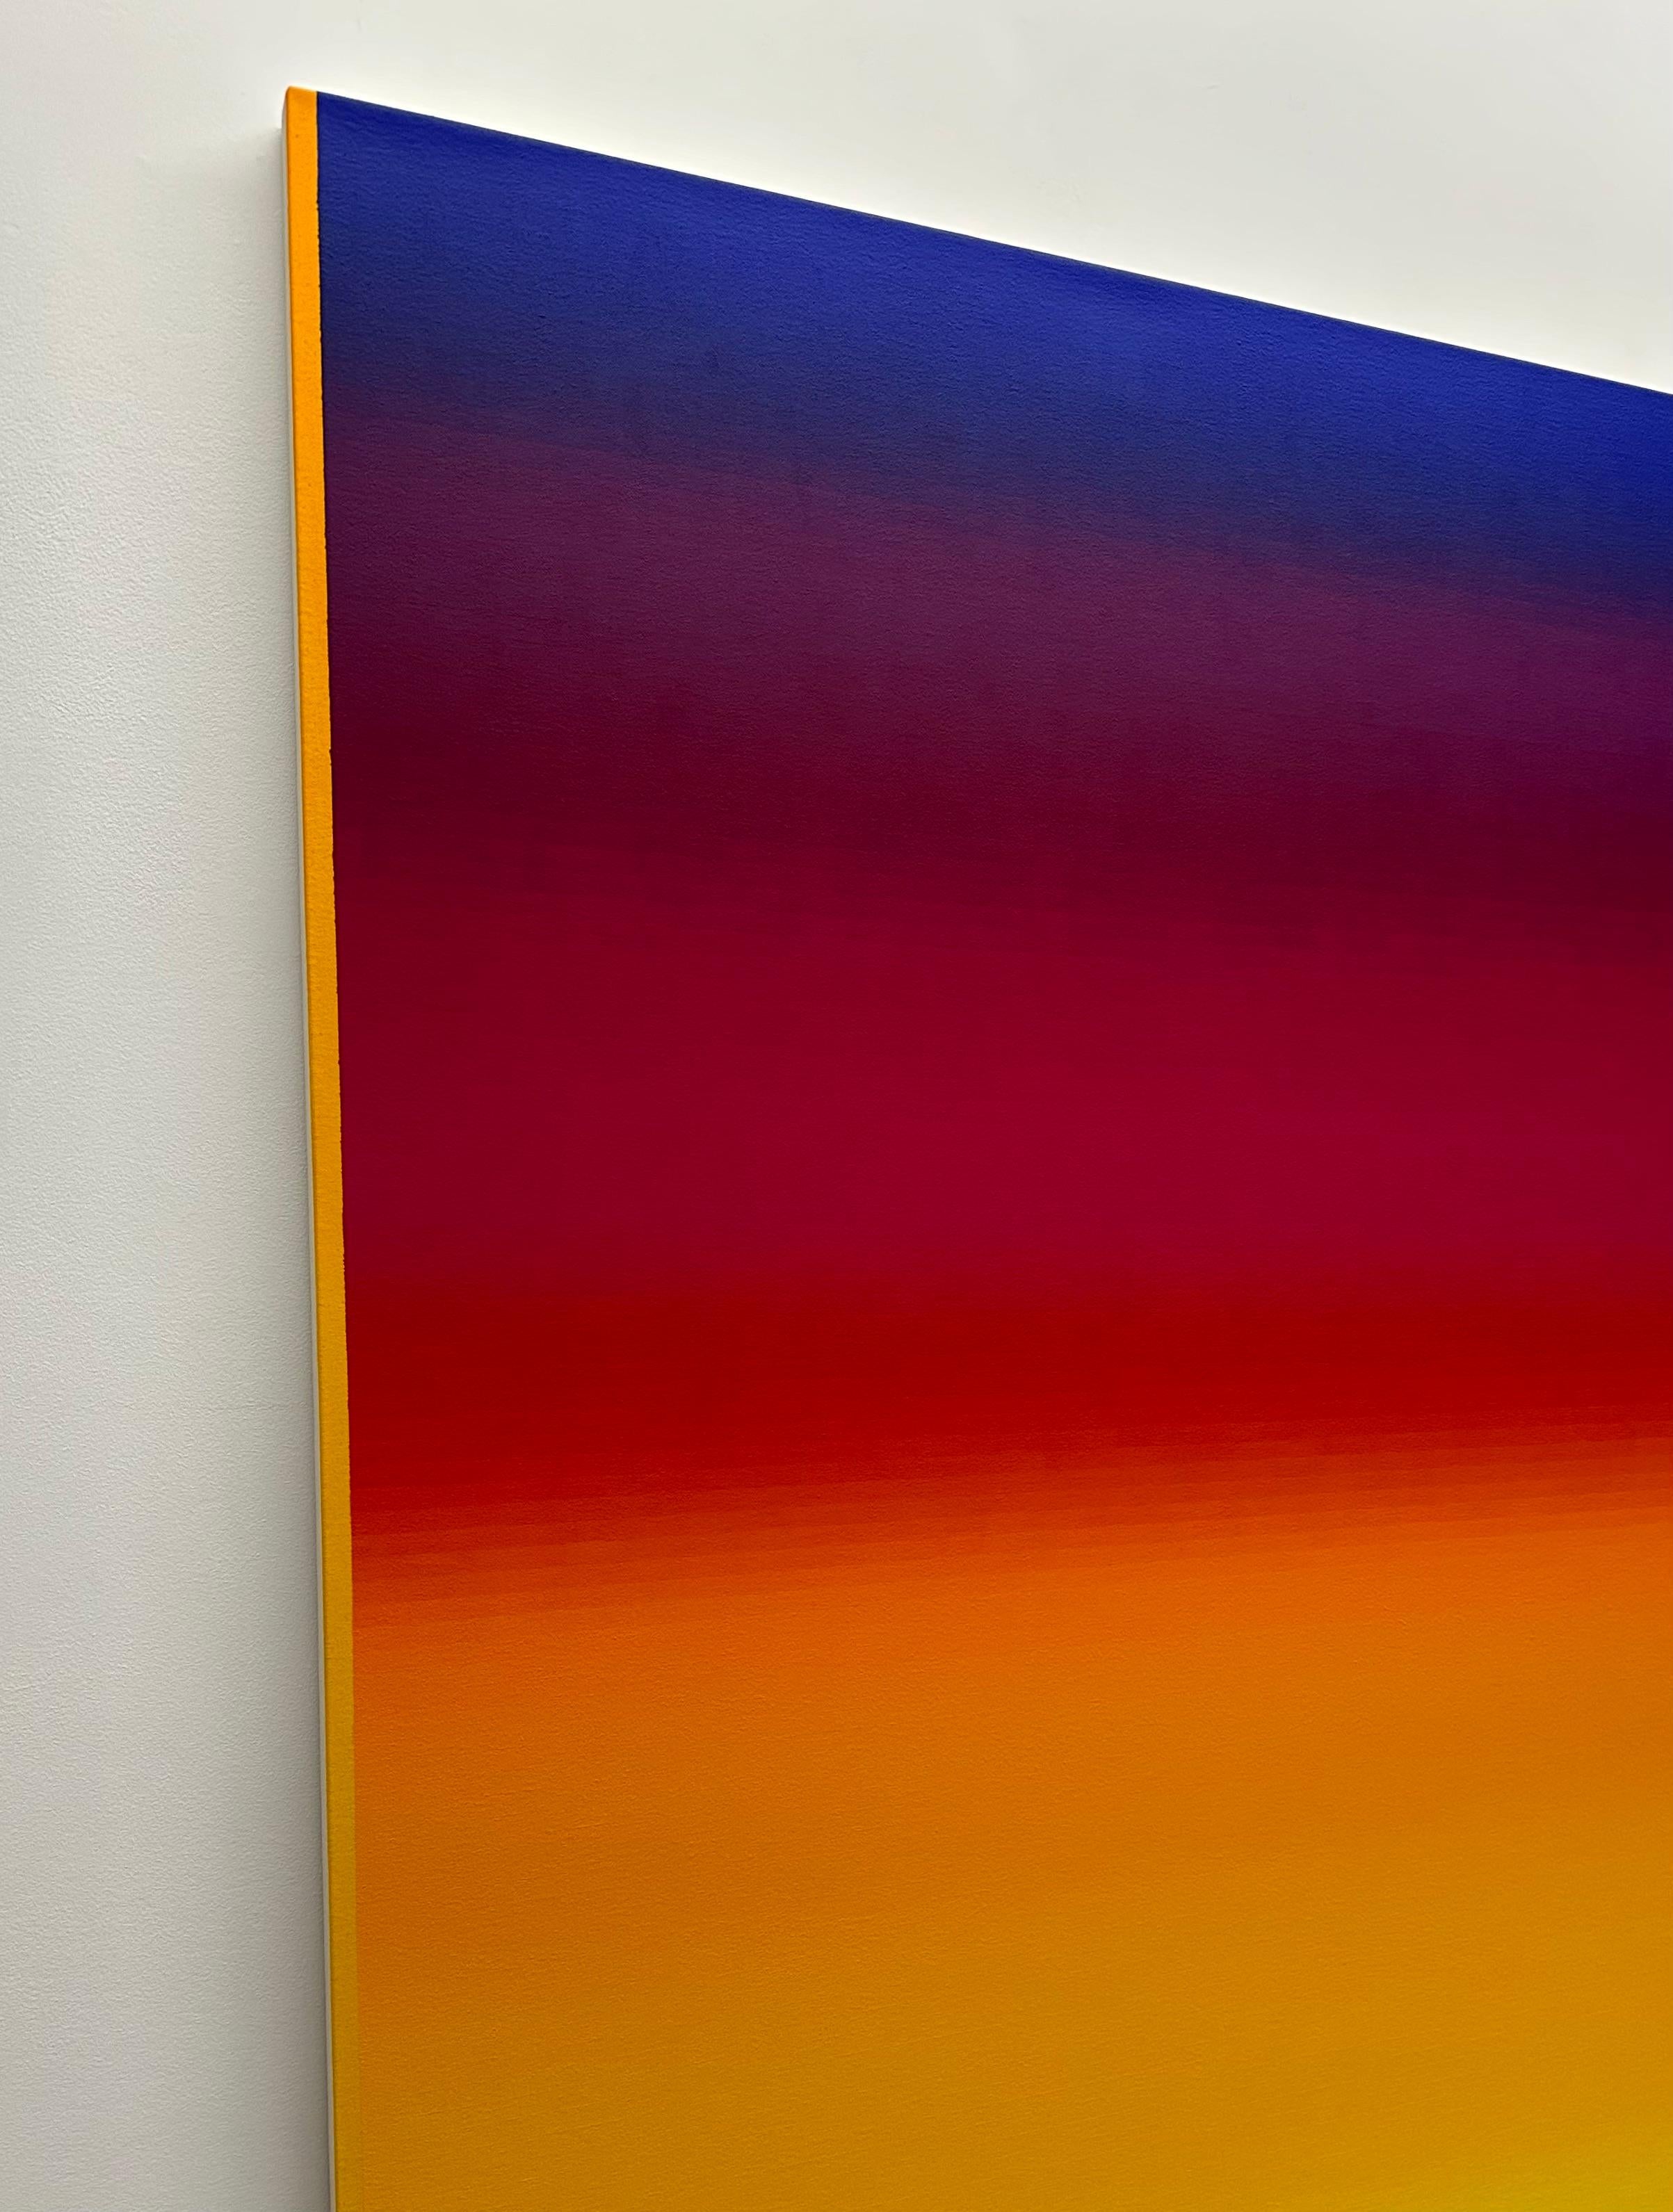 Rome Five, Hot Pink, Navy Cobalt Blue, Orange, Golden Yellow Gradient Stripes - Contemporary Painting by Audrey Stone